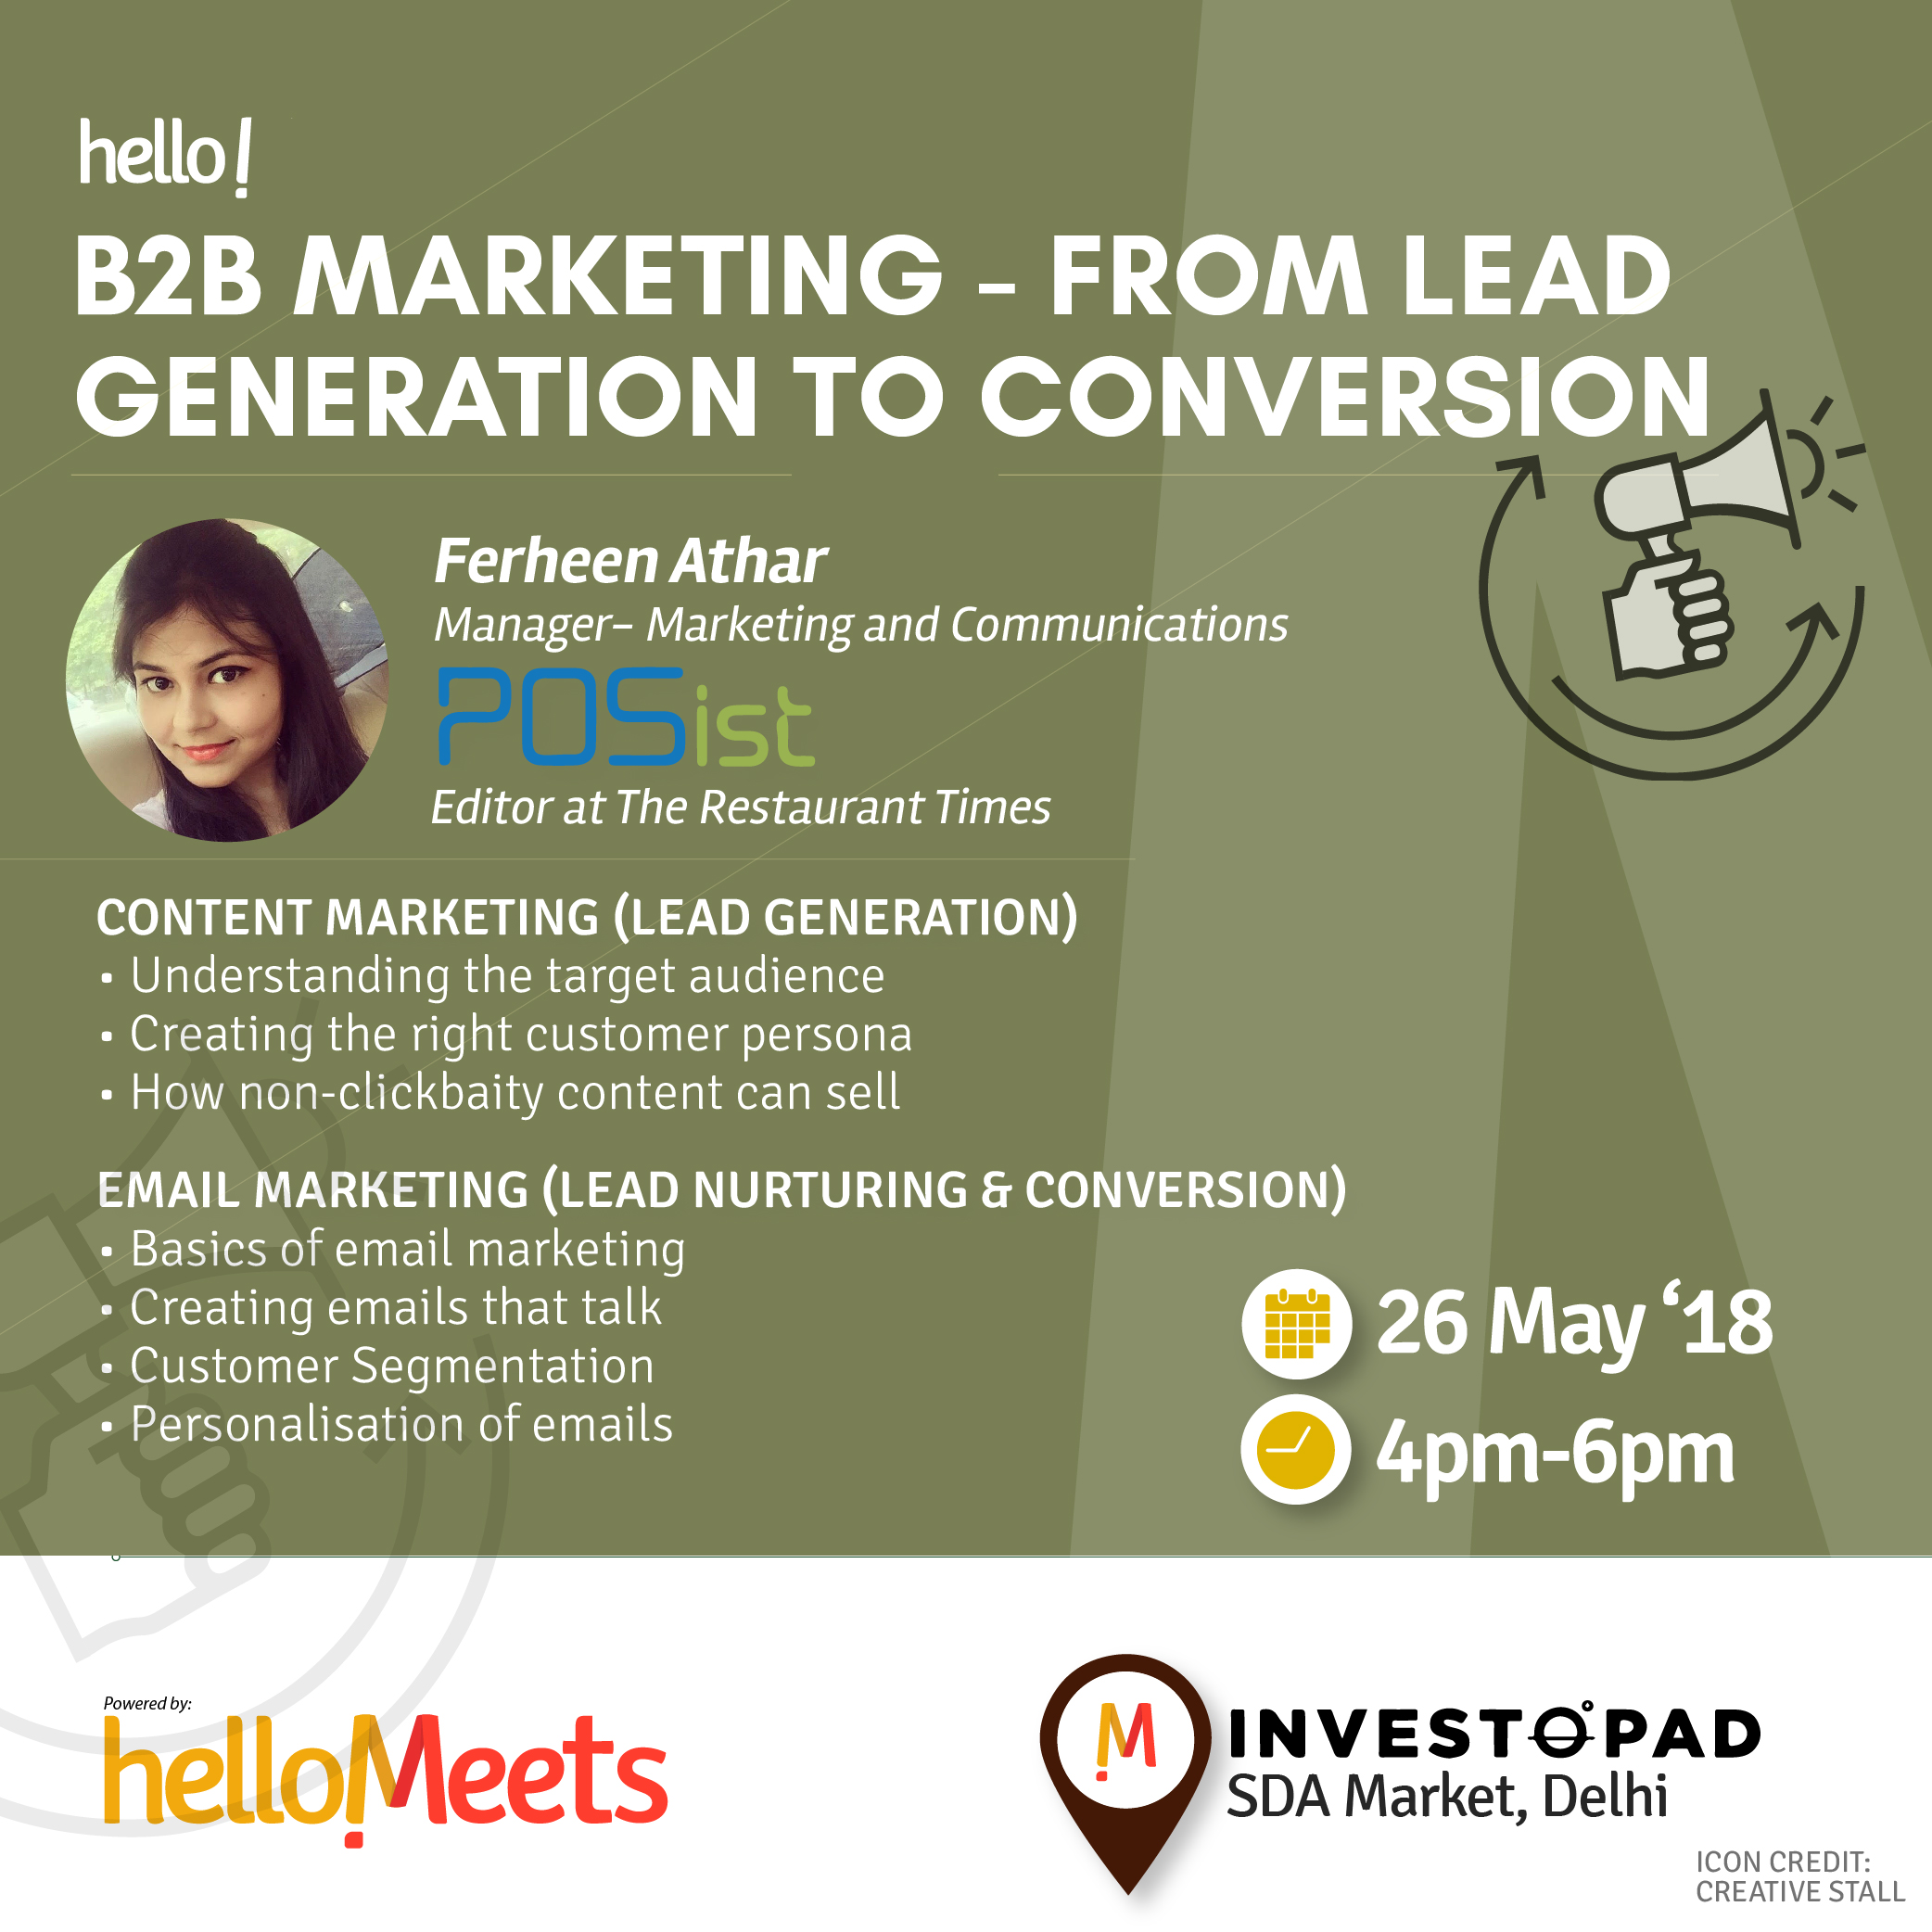 B2B Marketing - from Lead Generation to Conversion